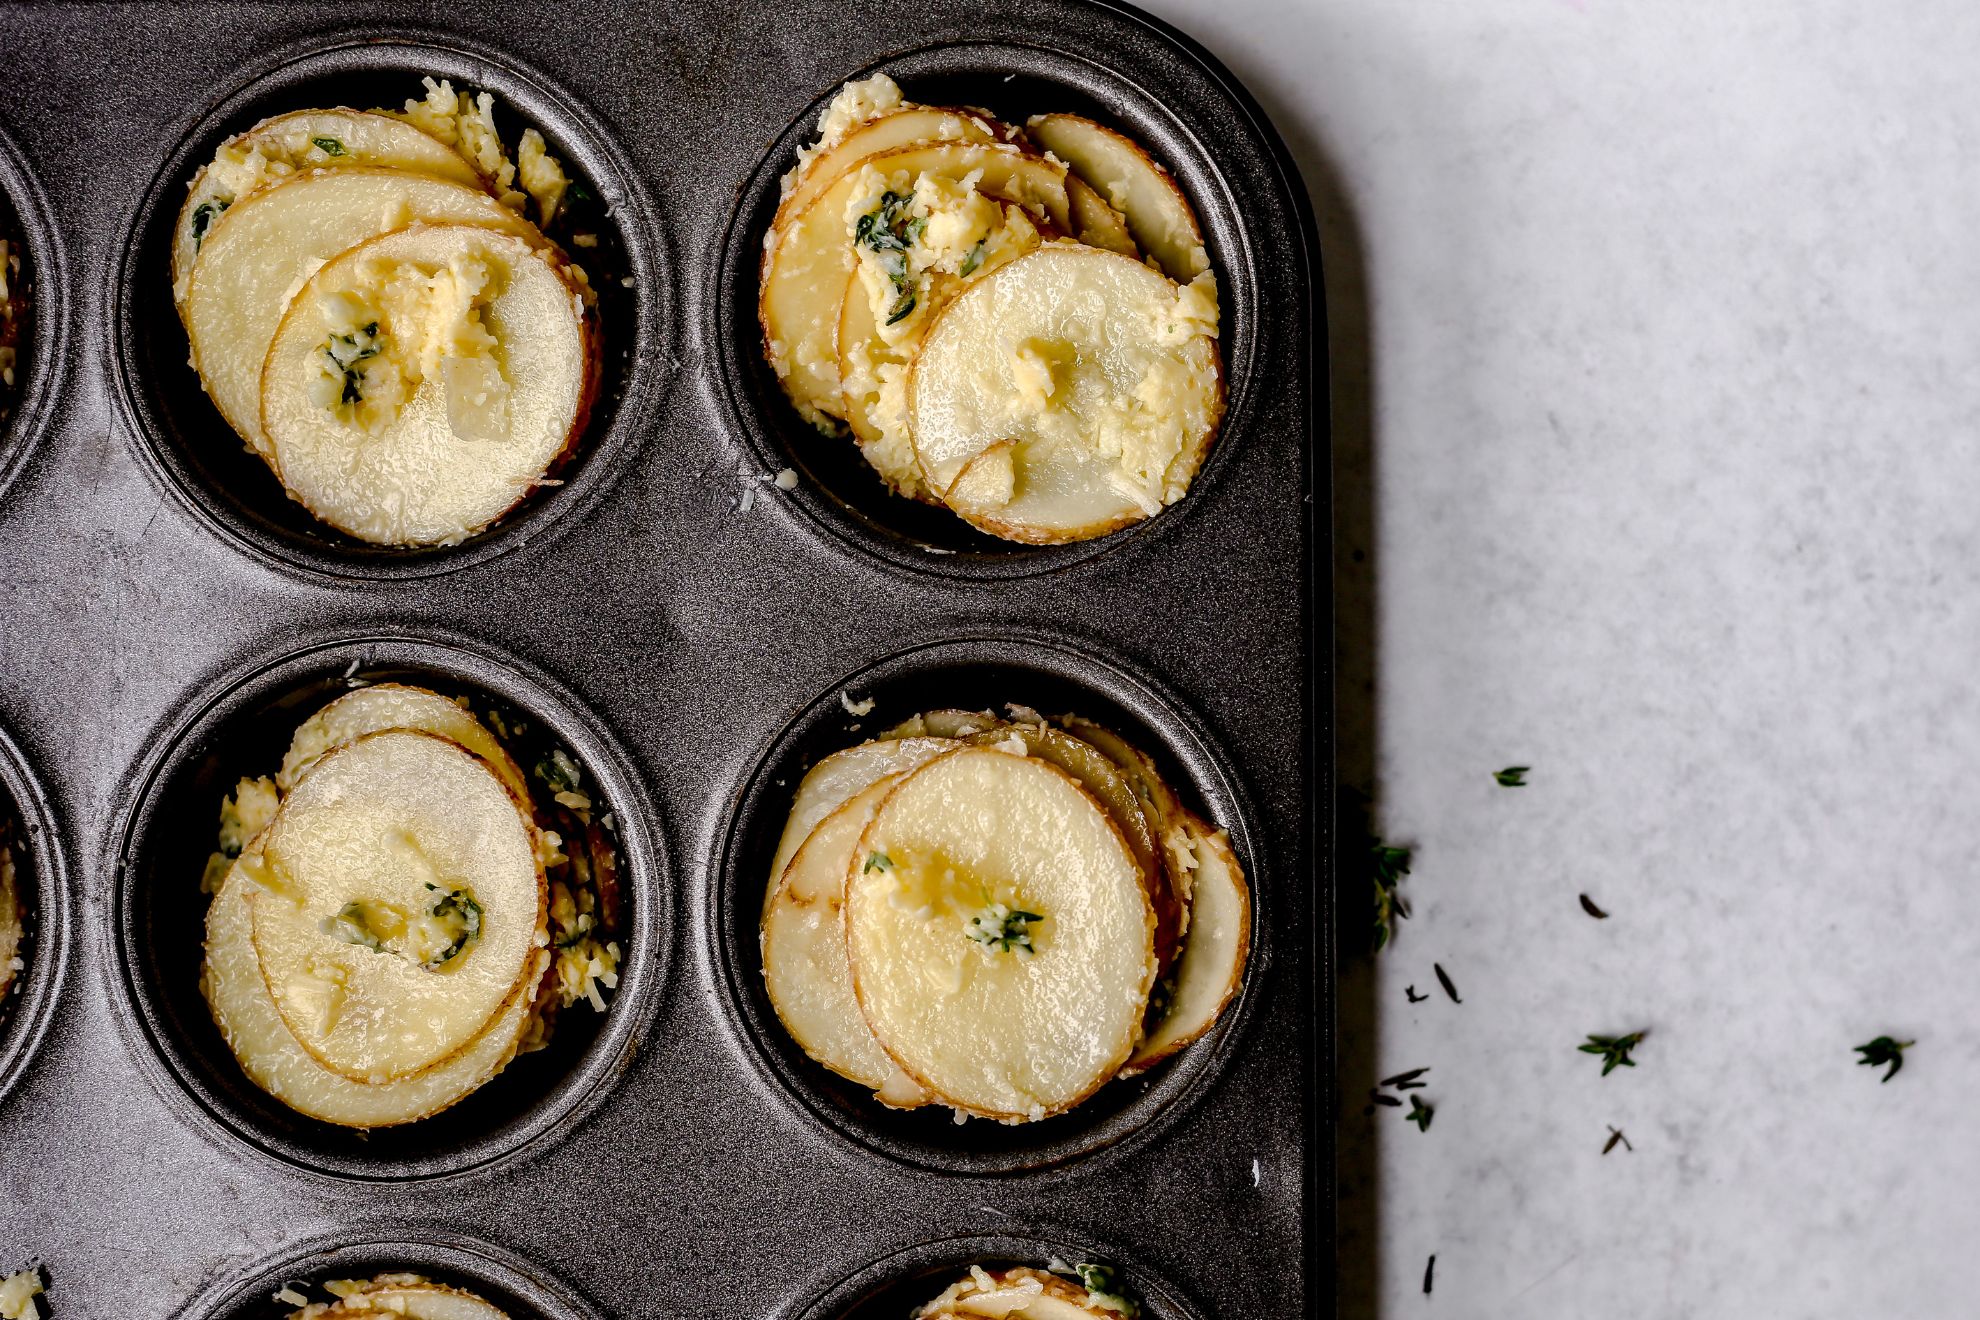 This is an overhead horizontal image of a grey muffin tin. The image focuses on the four corner muffin cups of the tin. In the muffin tin cups are stacks of sliced raw potatoes. The potatoes have fresh thyme leaves, butter, cheese and garlic on them. The muffin tin sits on a light grey surface.